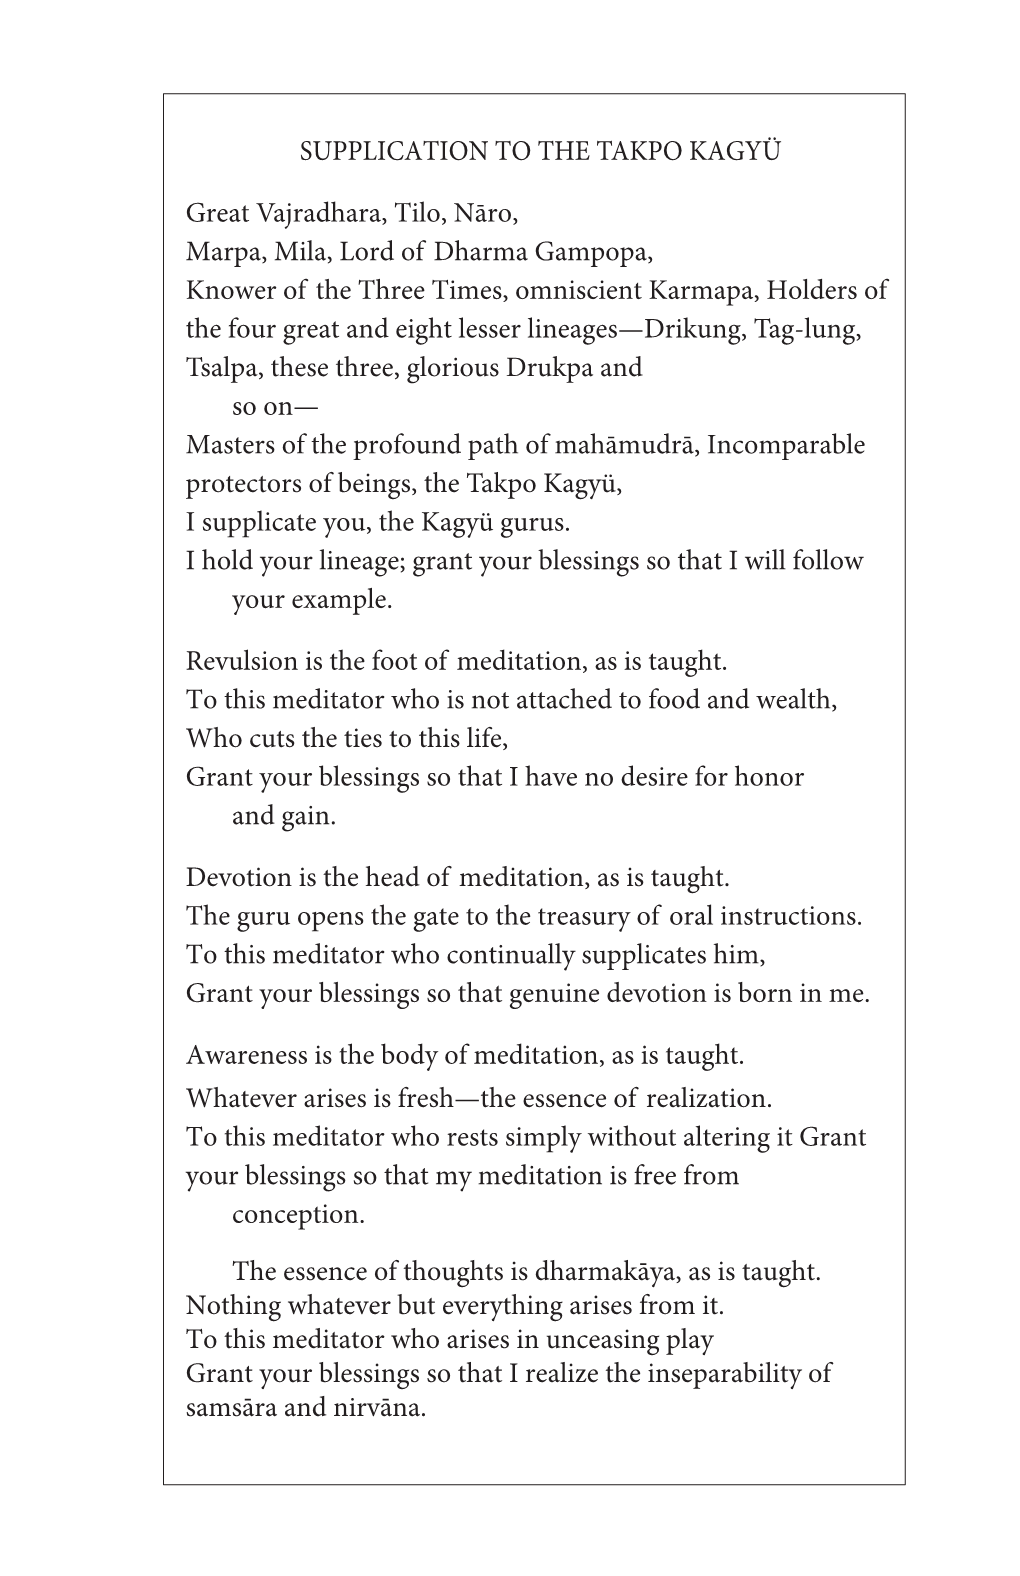 SUPPLICATION to the TAKPO KAGYÜ Great Vajradhara, Tilo